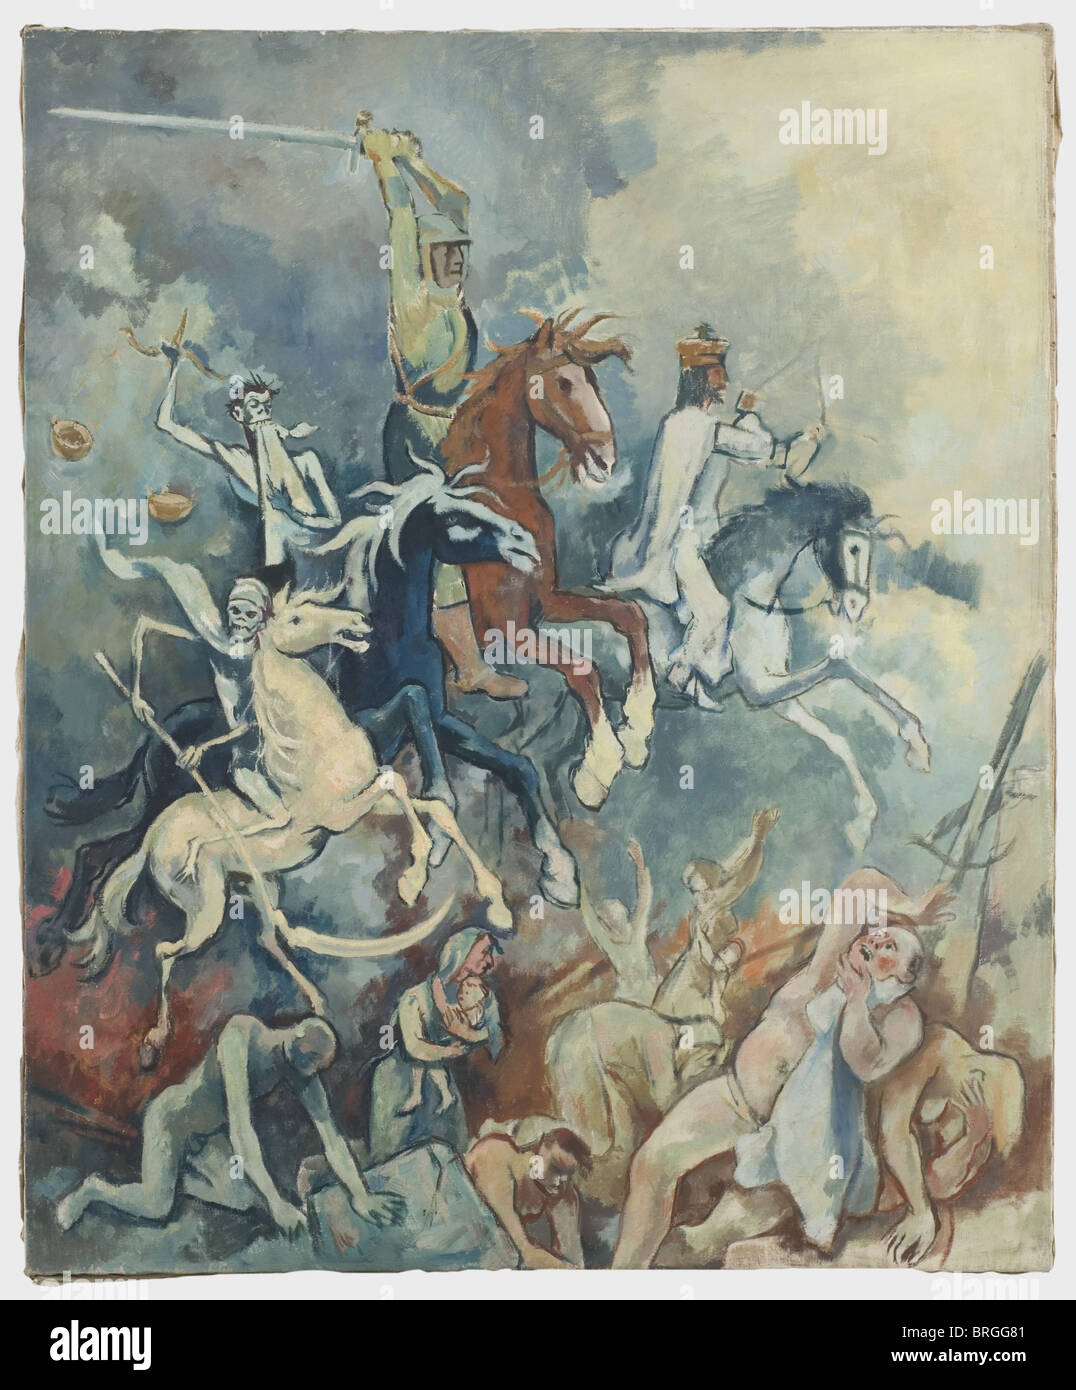 Otto Schubert (1892 - 1972), The Four Horsemen of the Apocalypse Oil on canvas. The four horsemen Famine, War, Plague and Death in front of a backdrop of ominous clouds, below fear-stricken people feebly trying to escape. Stretcher frame, picture size 110 x 130 cm. This painting is clearly reminiscient of Albrecht Dürer, who dedicated a series of woodcuts in 1498 to the apocalypse as described in John, chapter 6, verse 1 - 8, a section of the bible dealing with the appearance of the horsemen. As a young man, Otto Schubert took part in World War I and , Artist's Copyright has not to be cleared Stock Photo